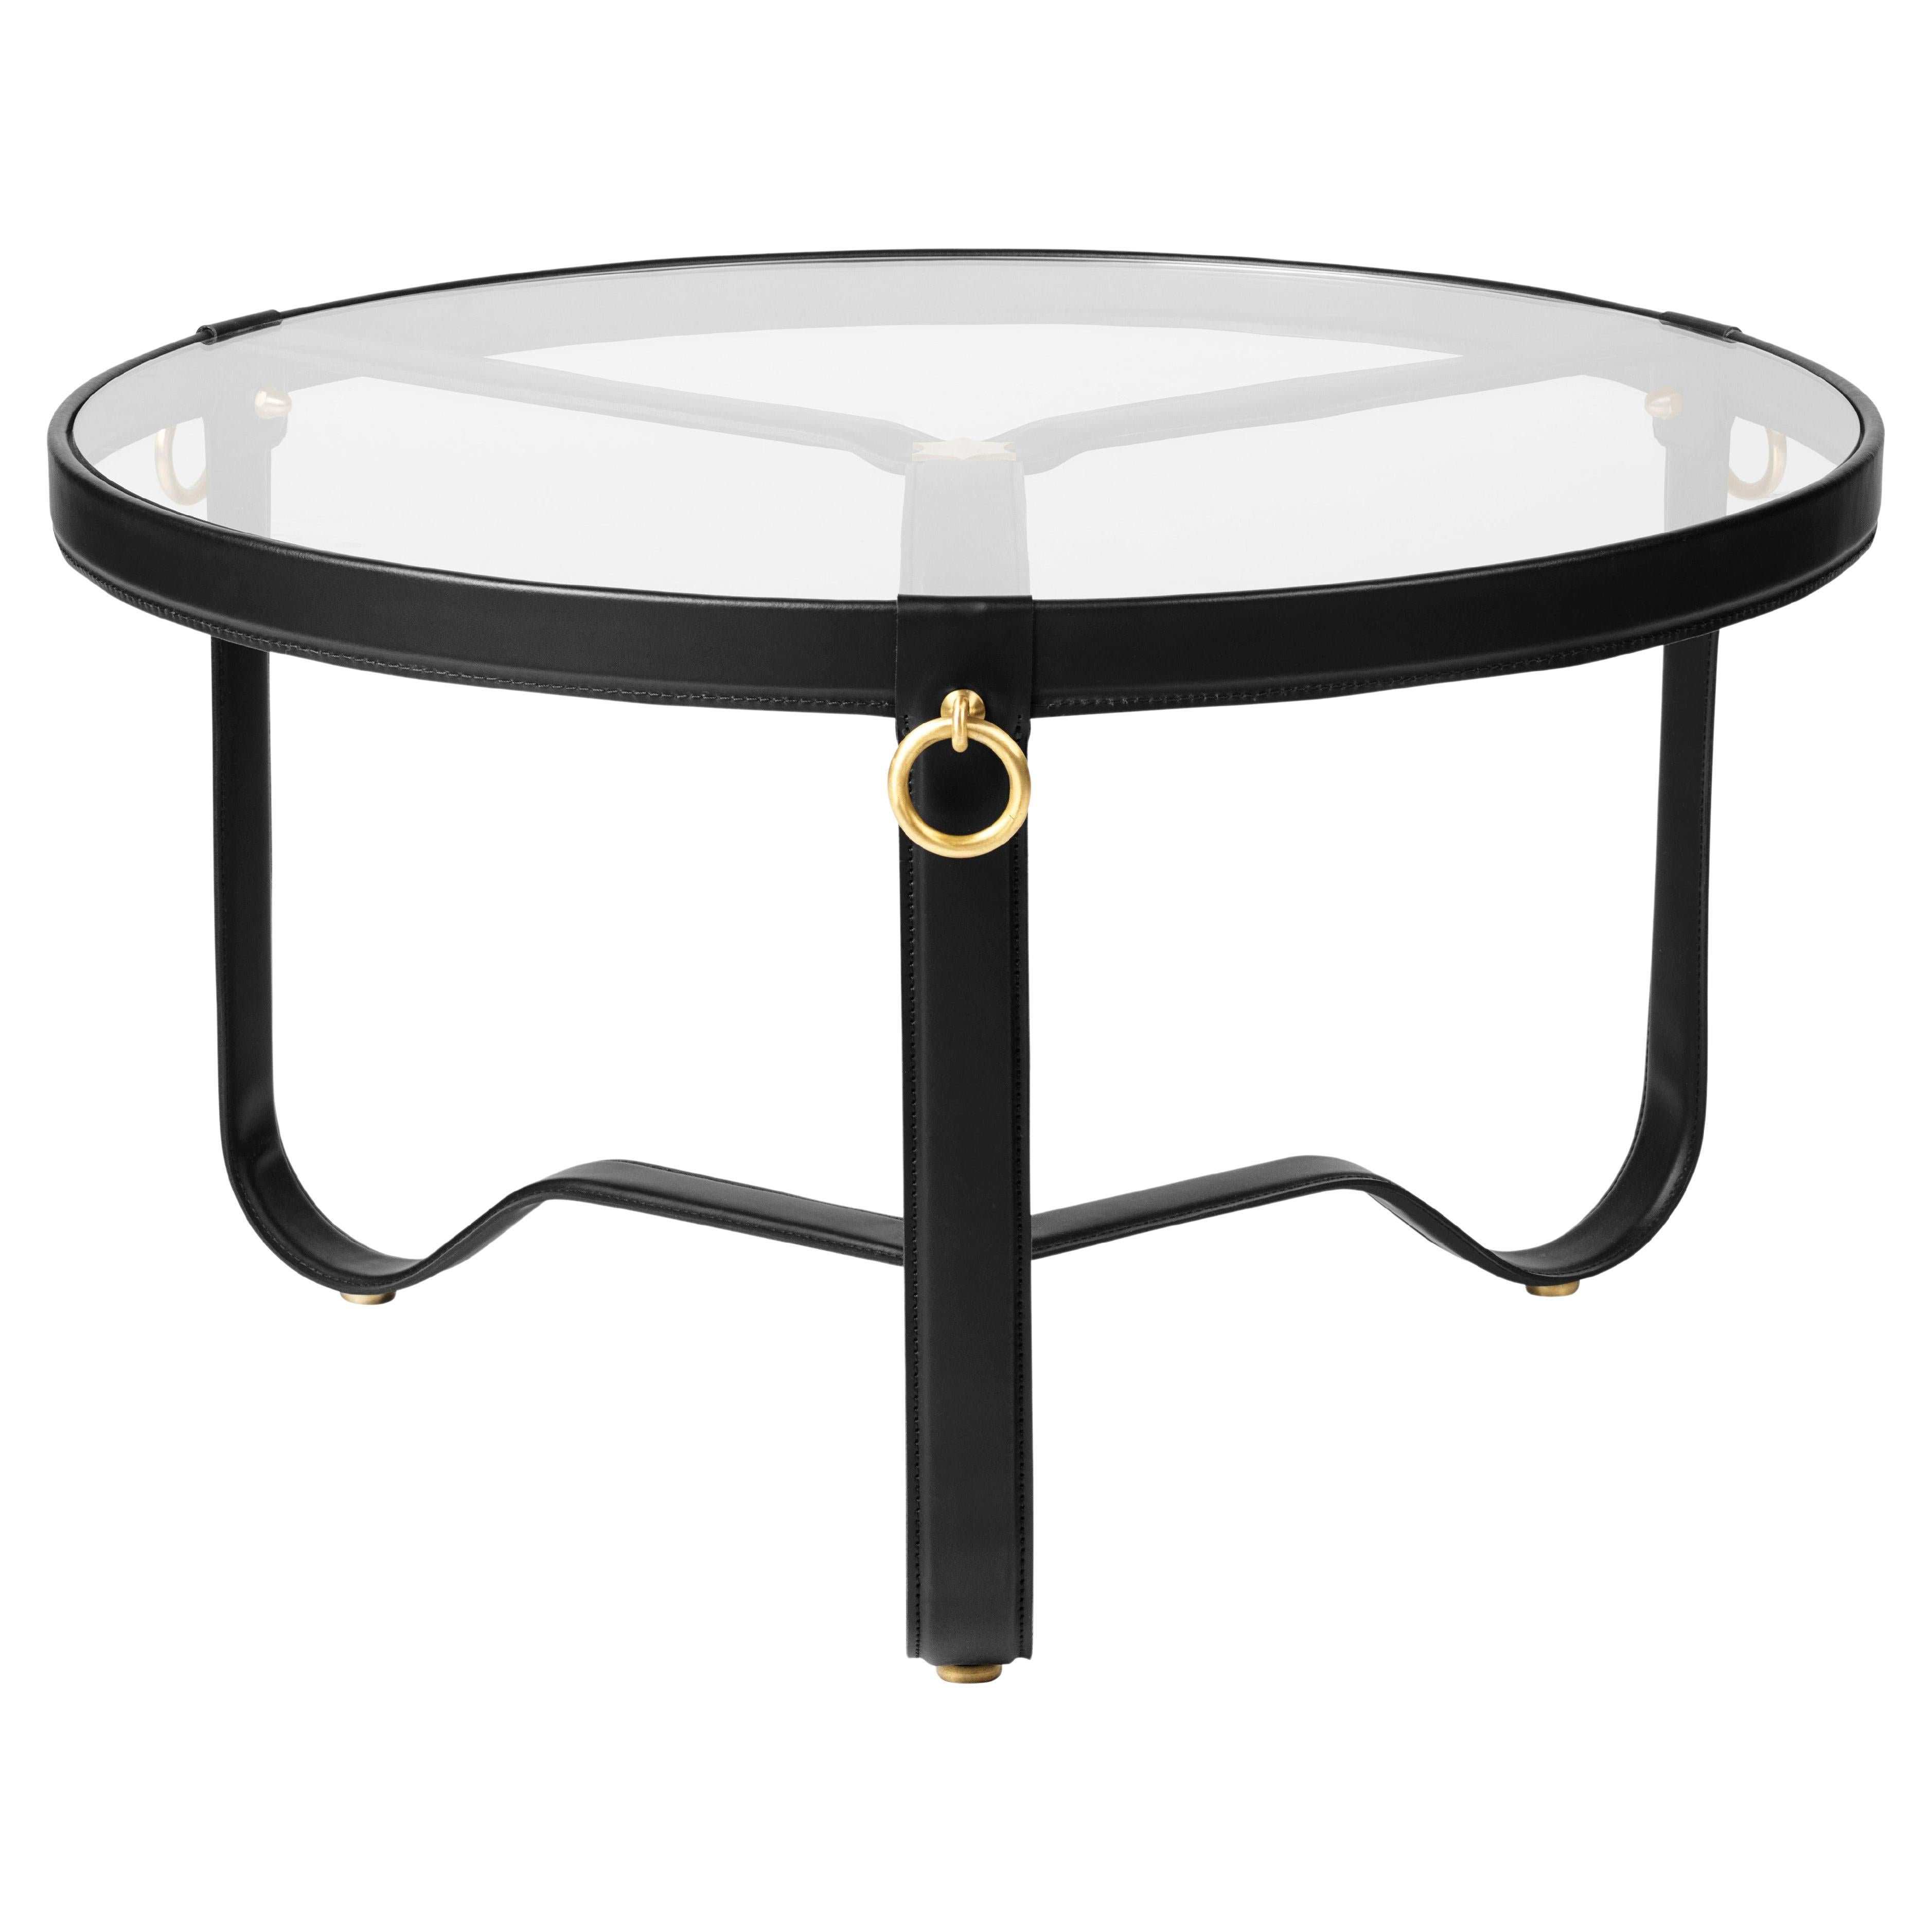 Jacques Adnet 'Circulaire' Glass and Black Leather Coffee or Side Table for GUBI